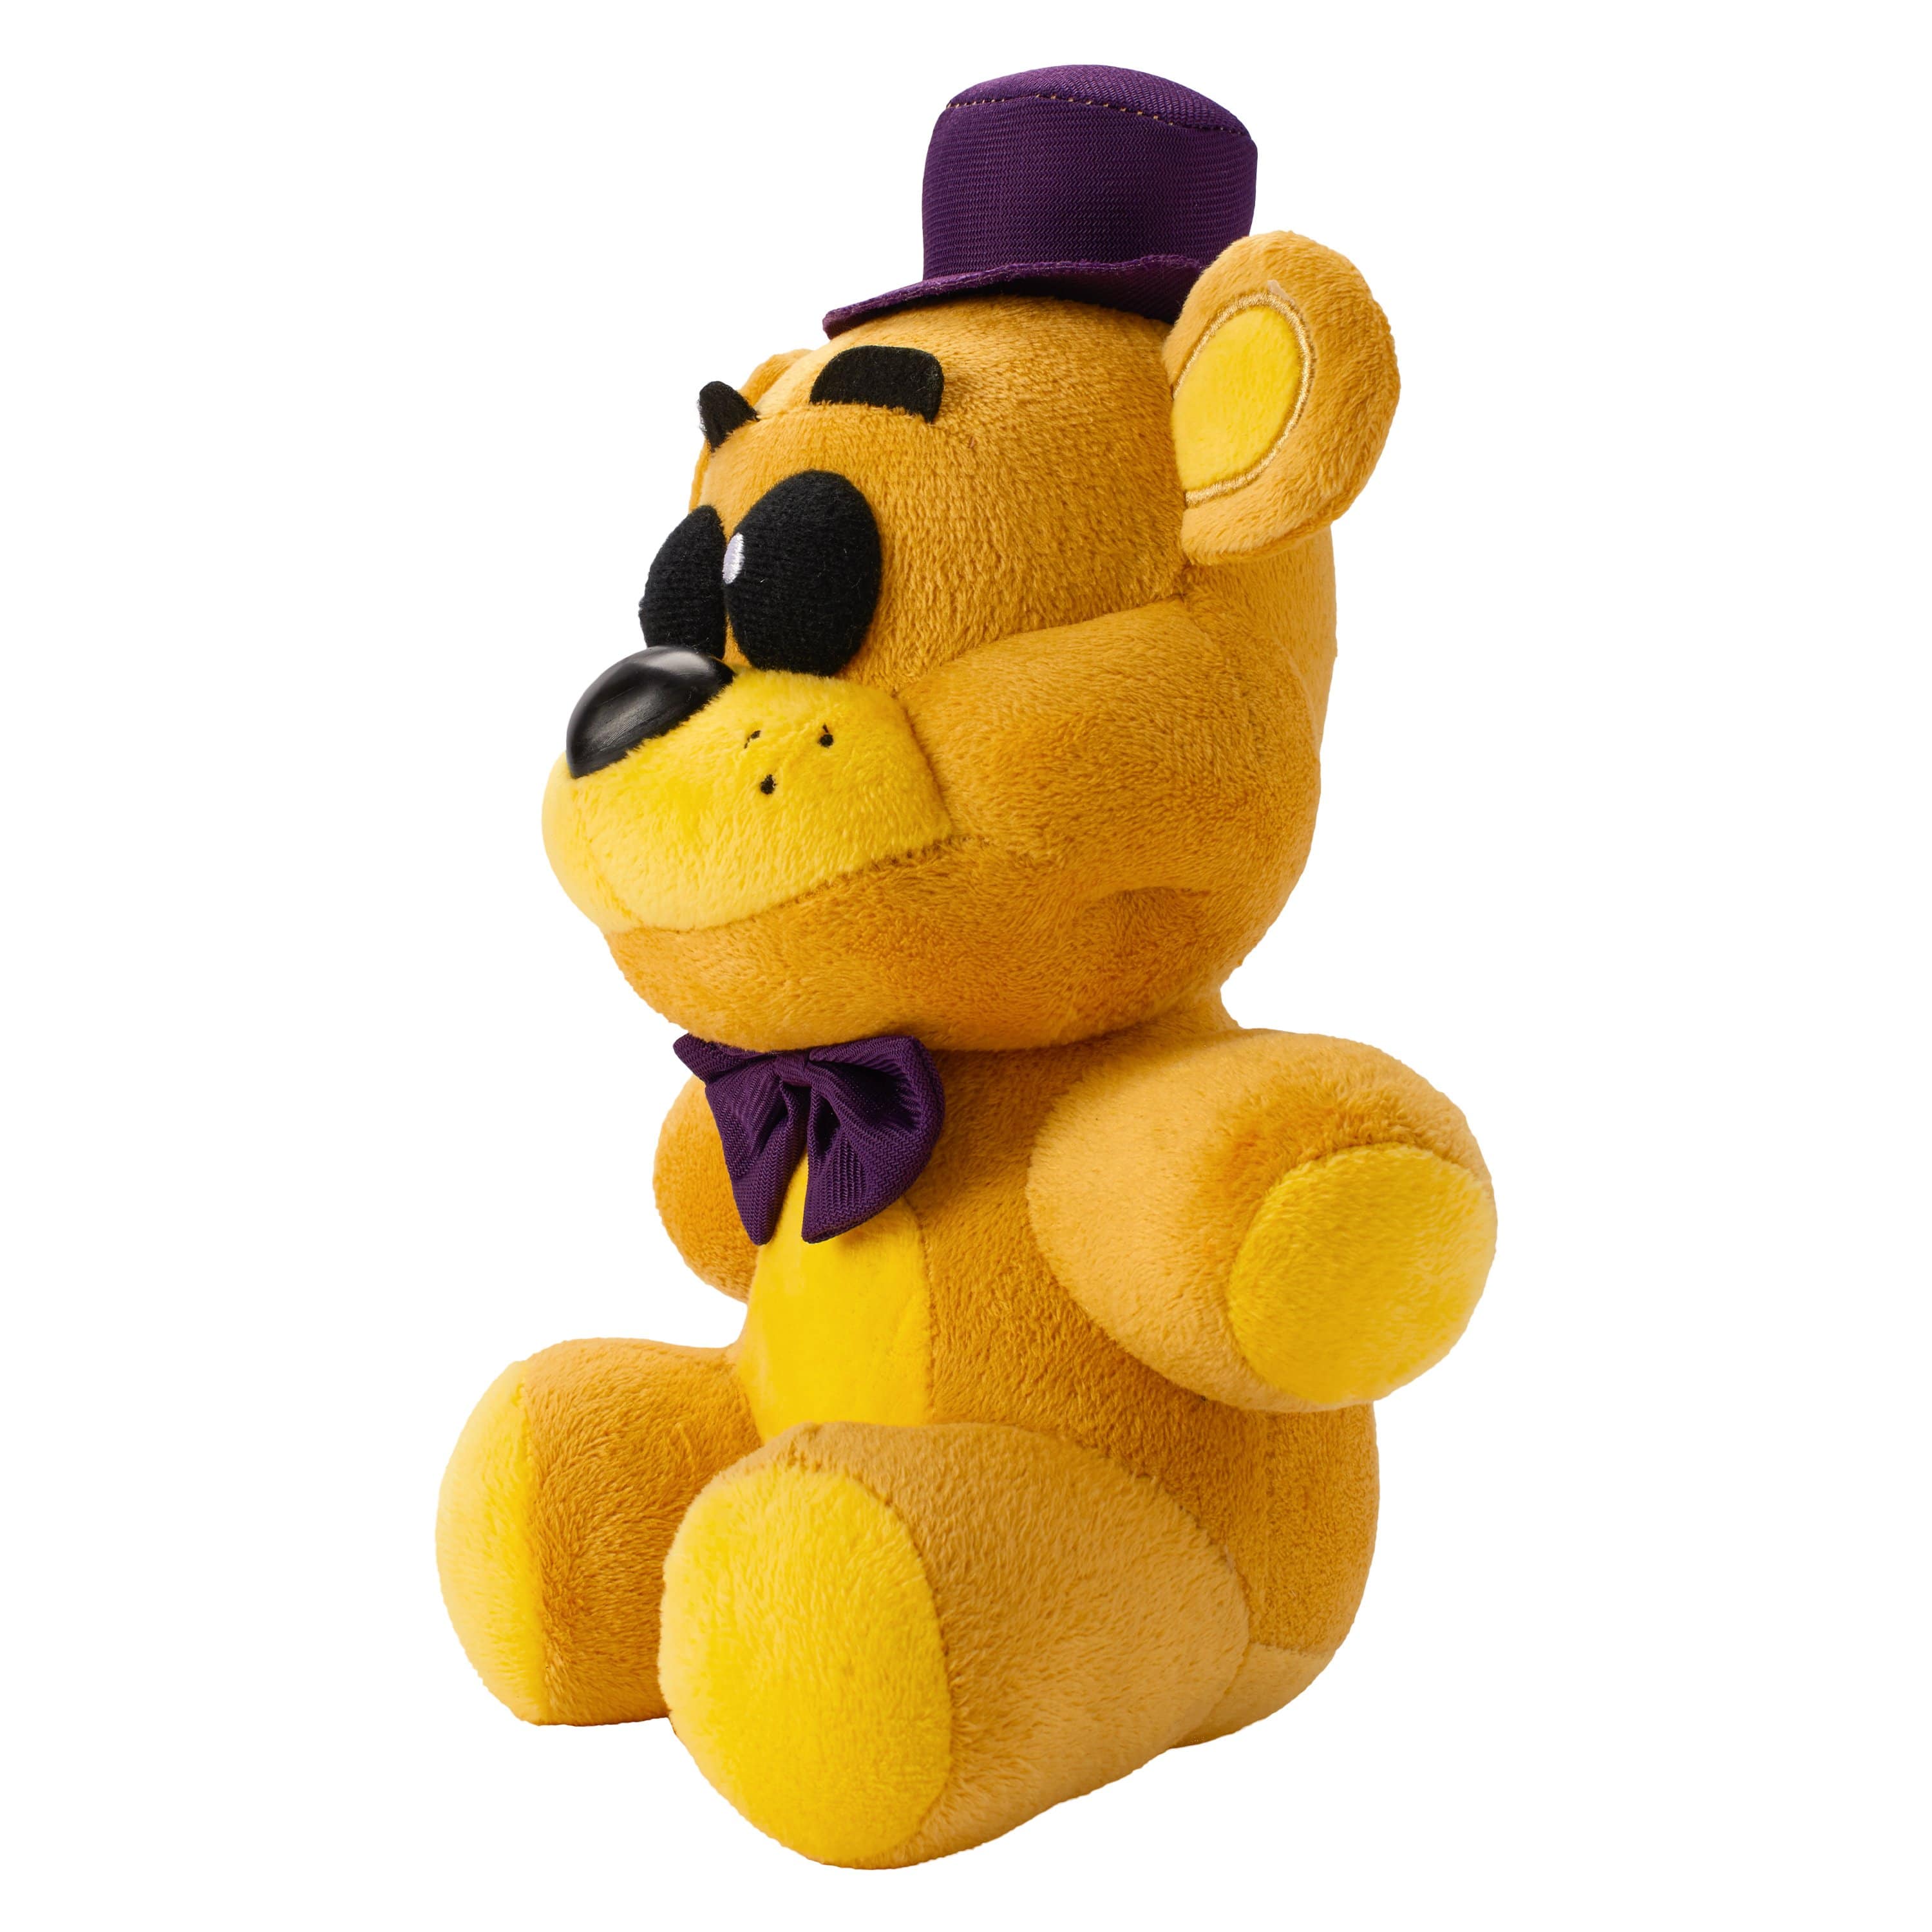 Five Nights at Freddy's - Limited Edition Possessed Fredbear Plush